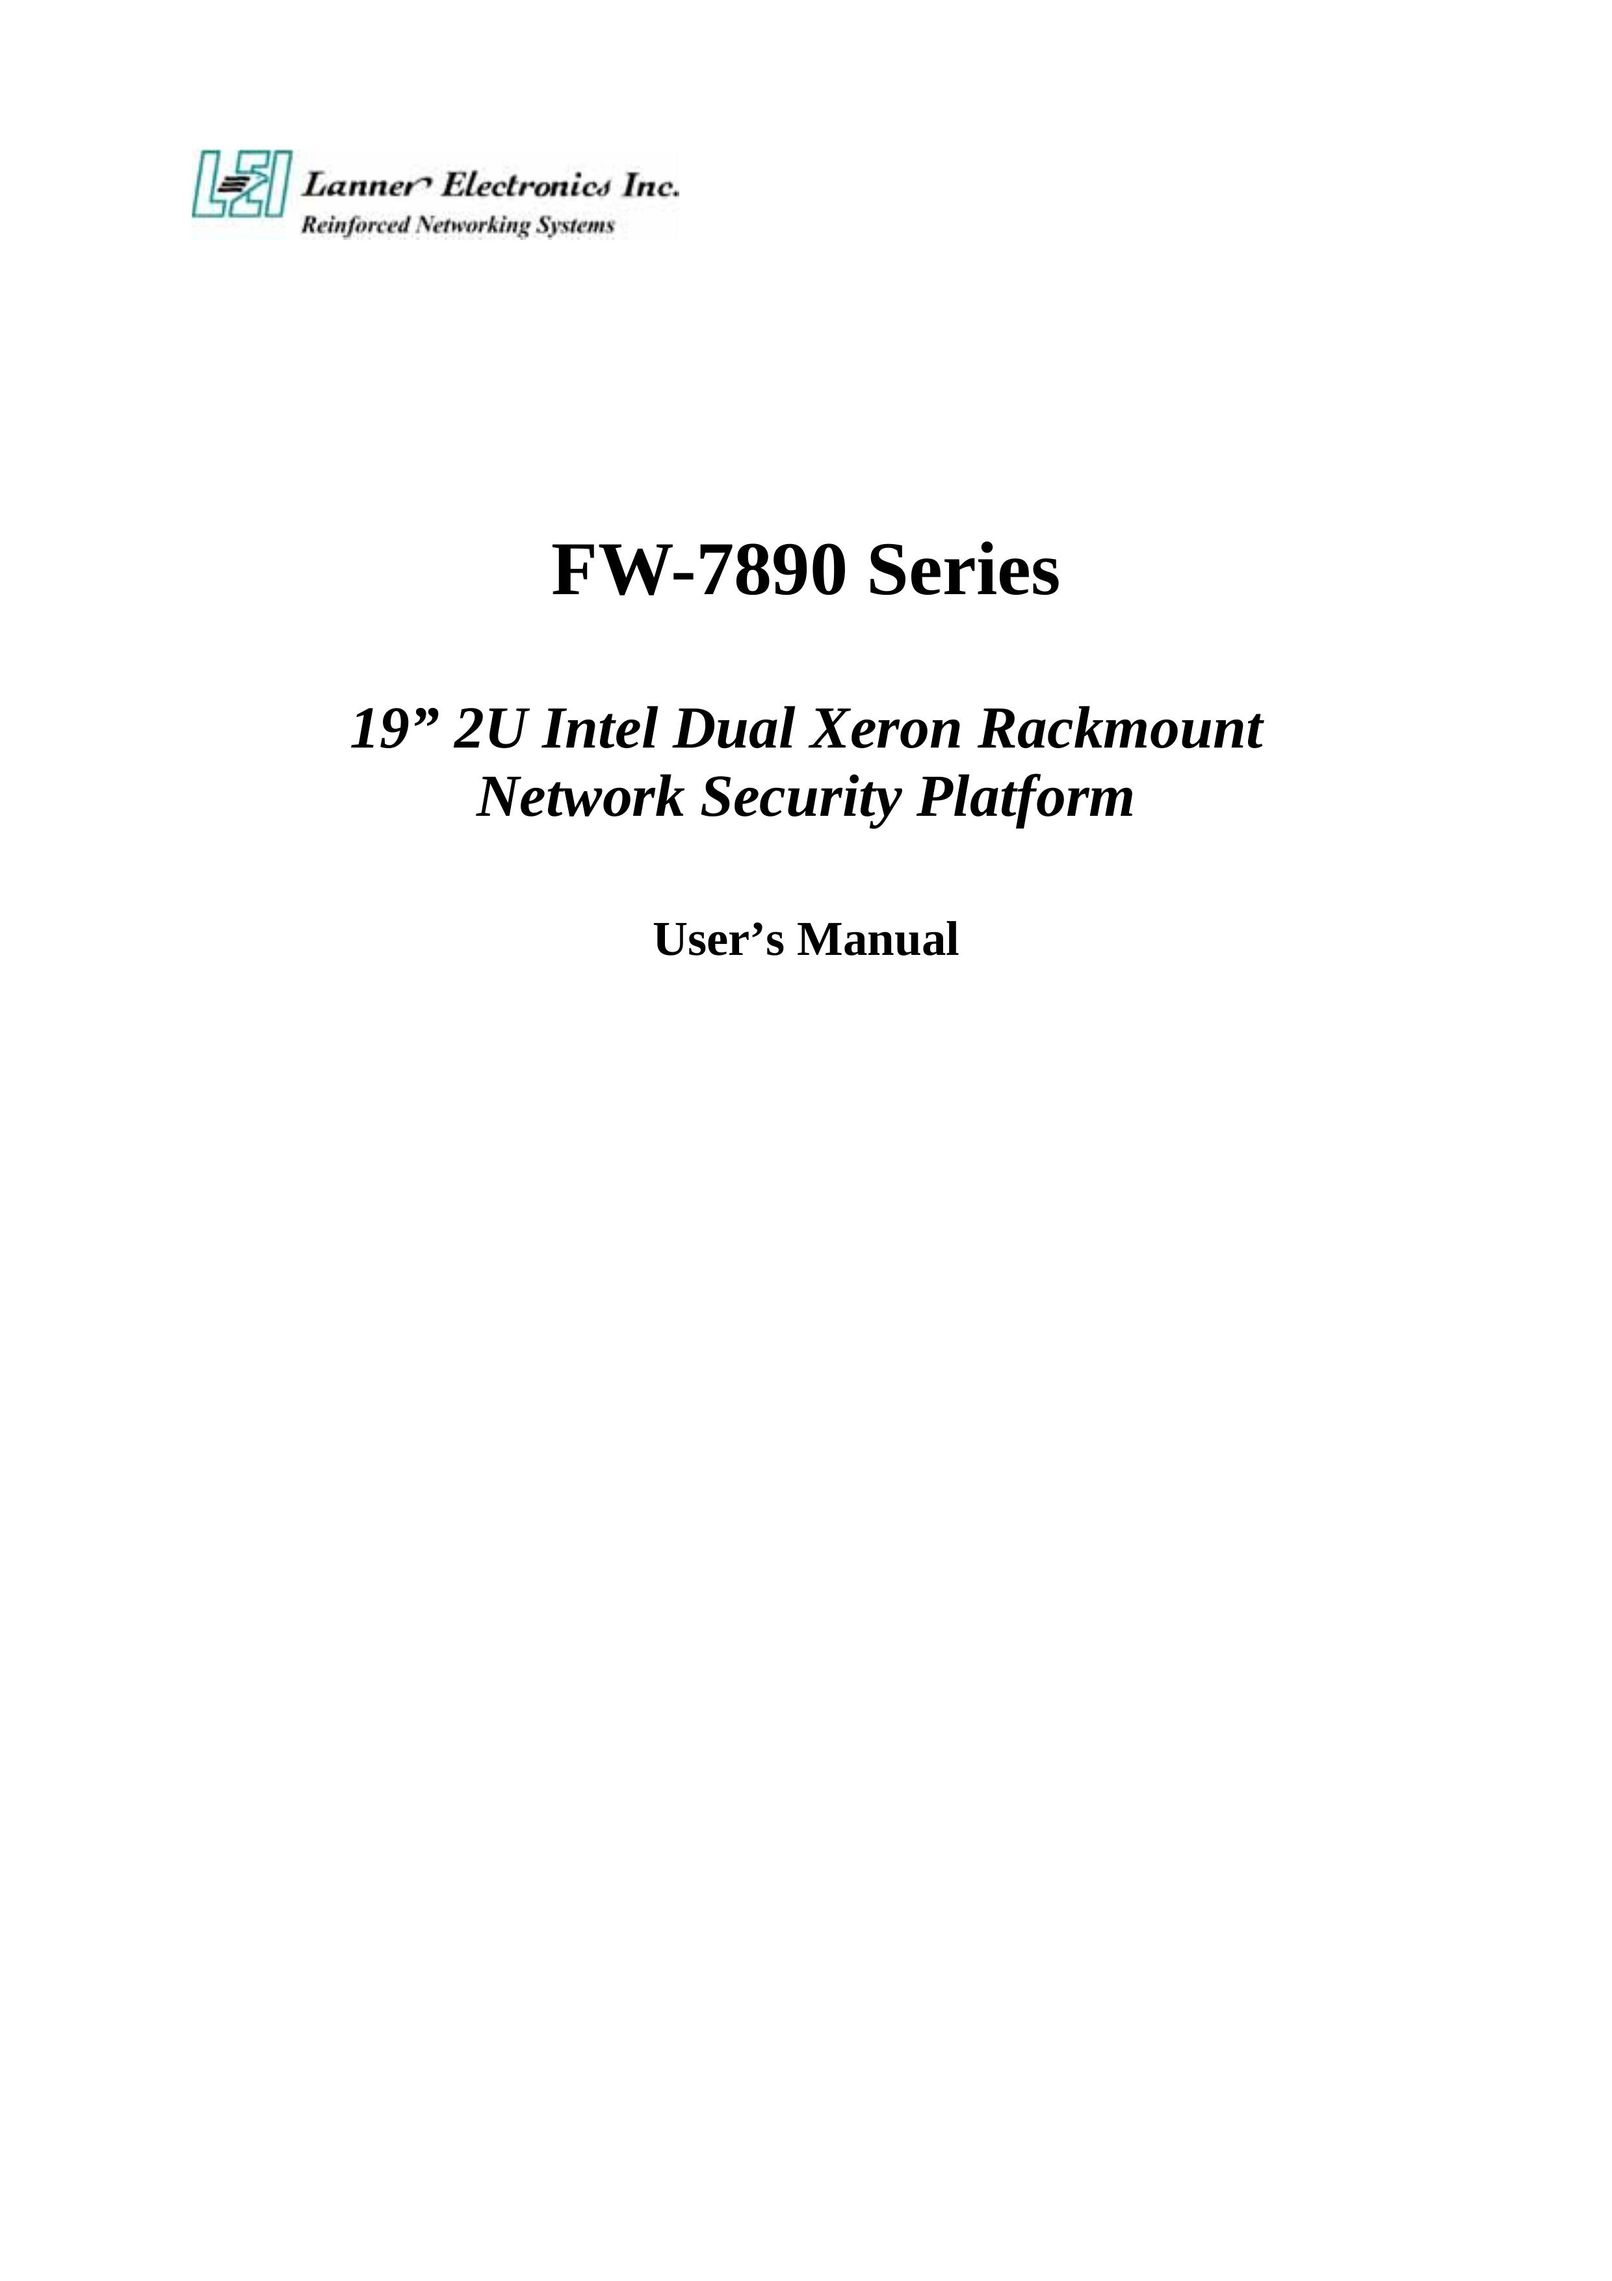 Lanner electronic FW-7890 Network Card User Manual